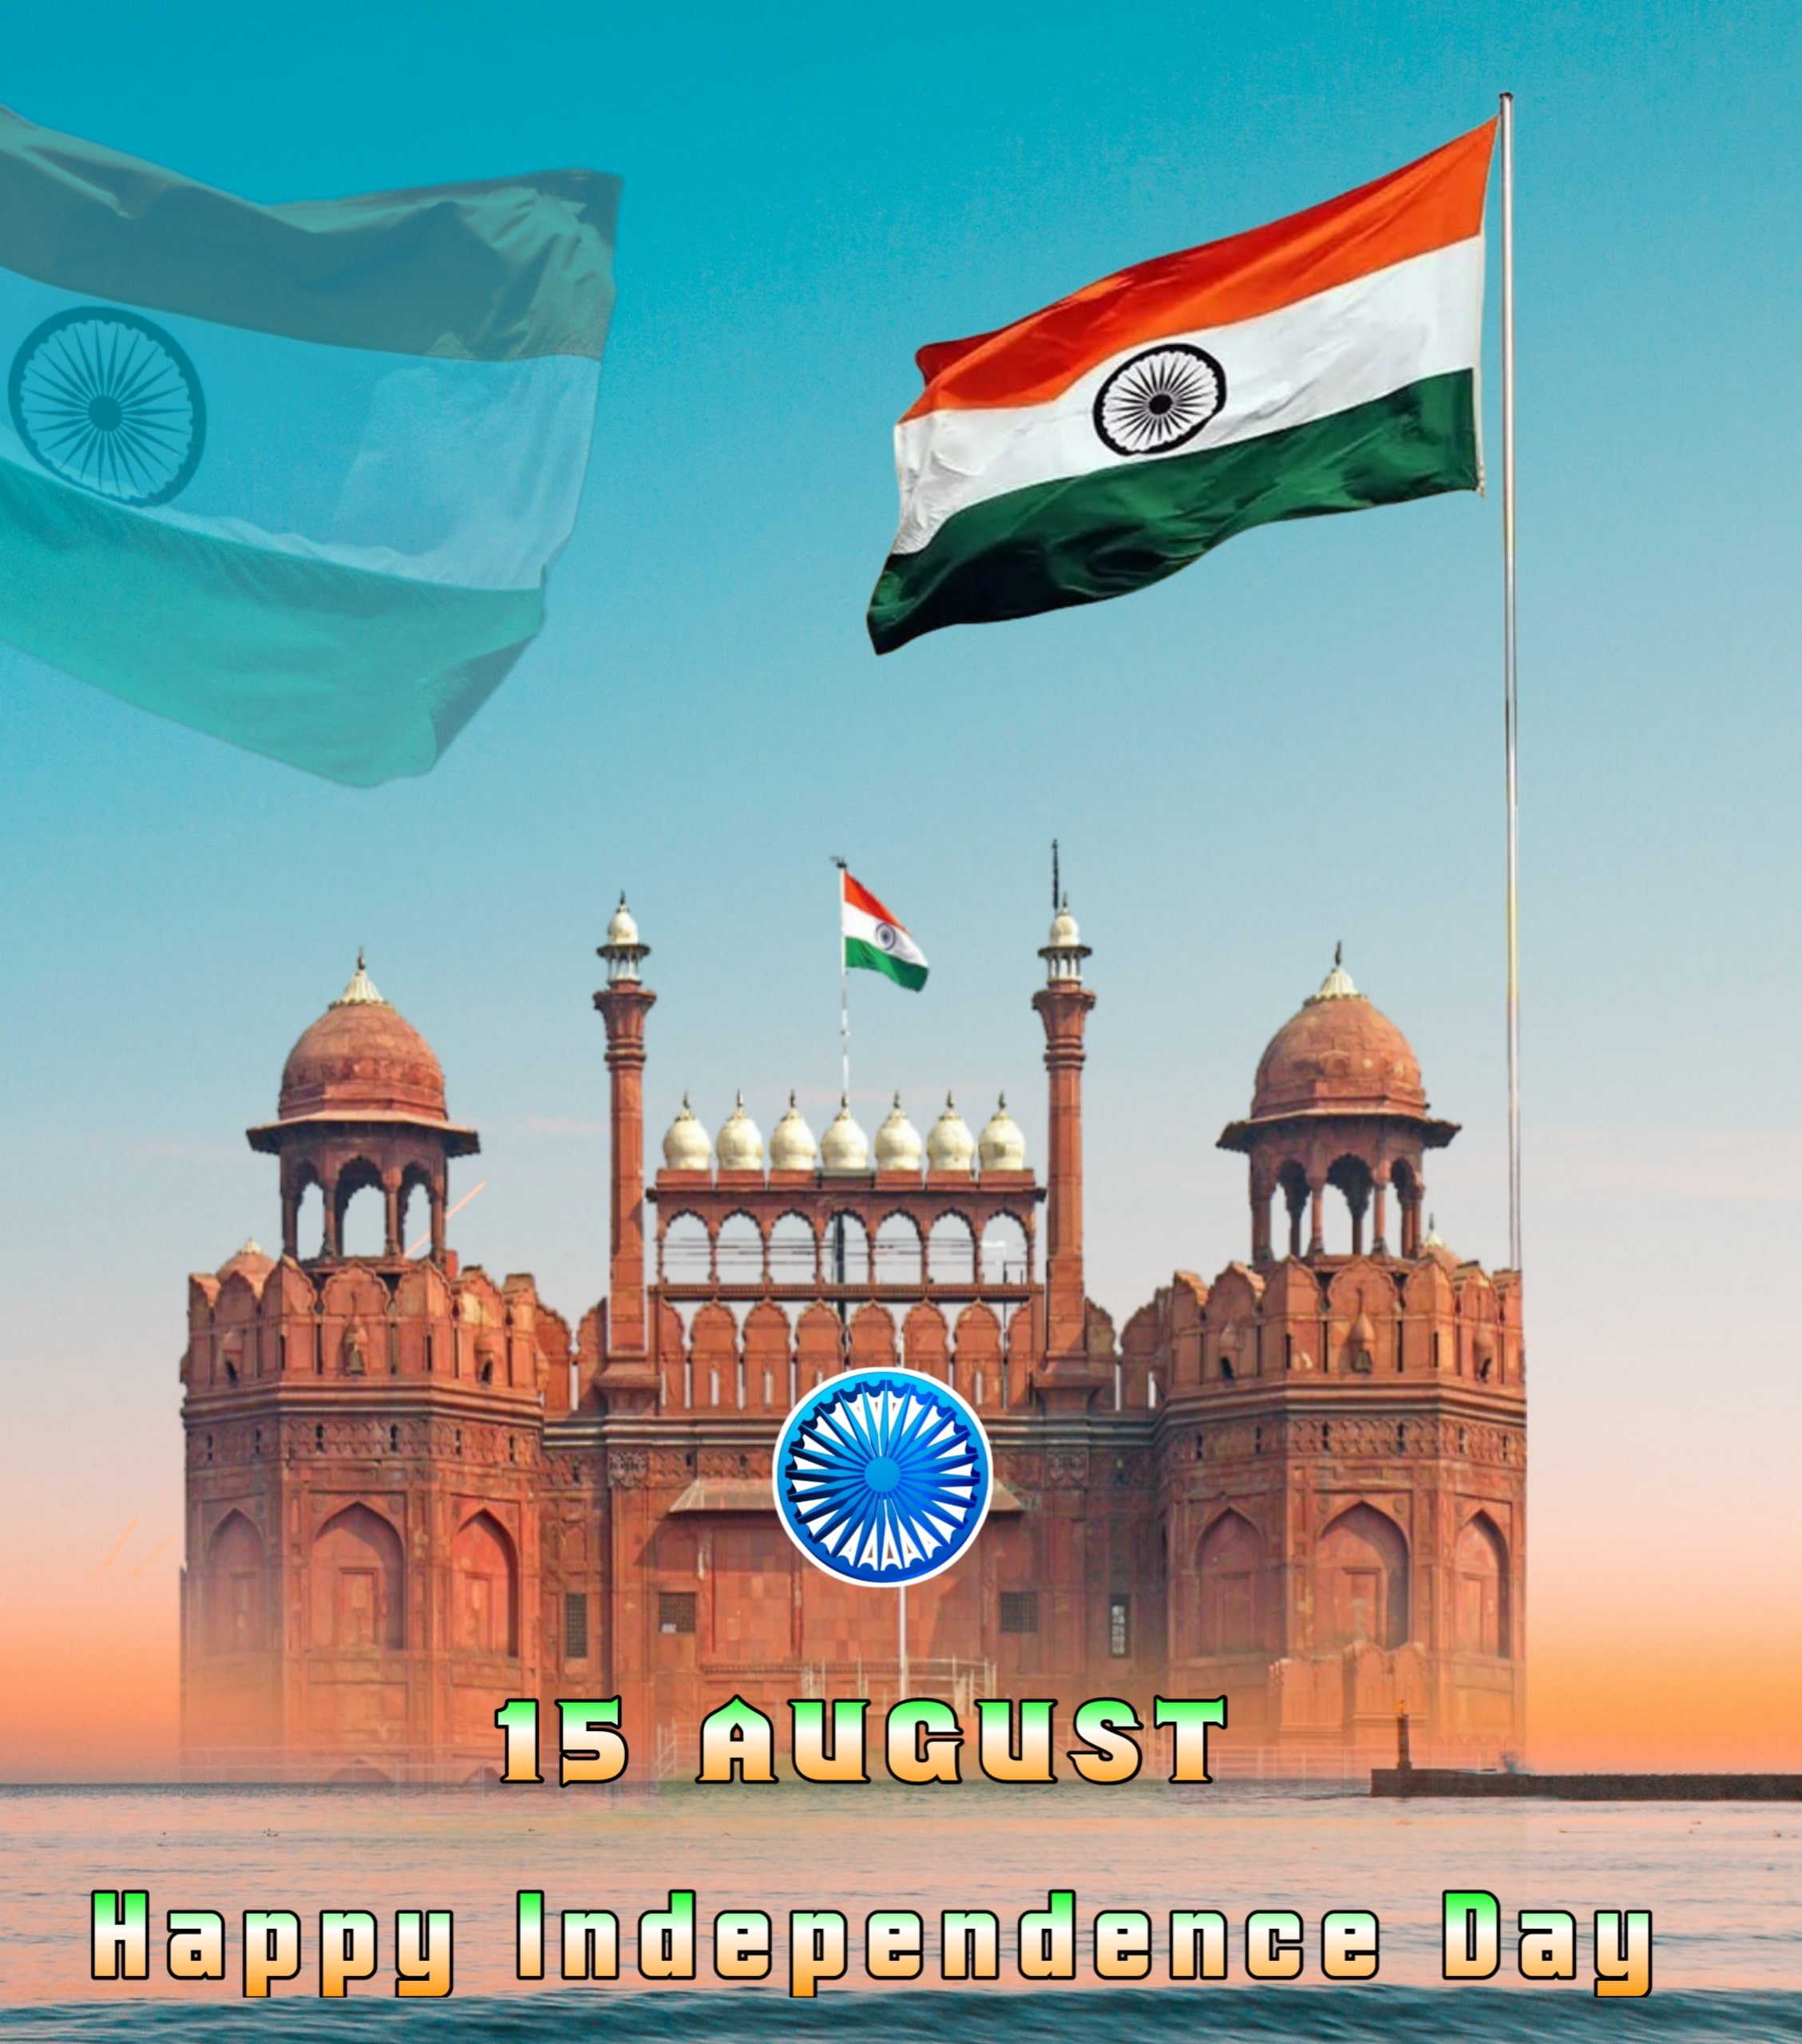 Independence Day HD Image Free Download